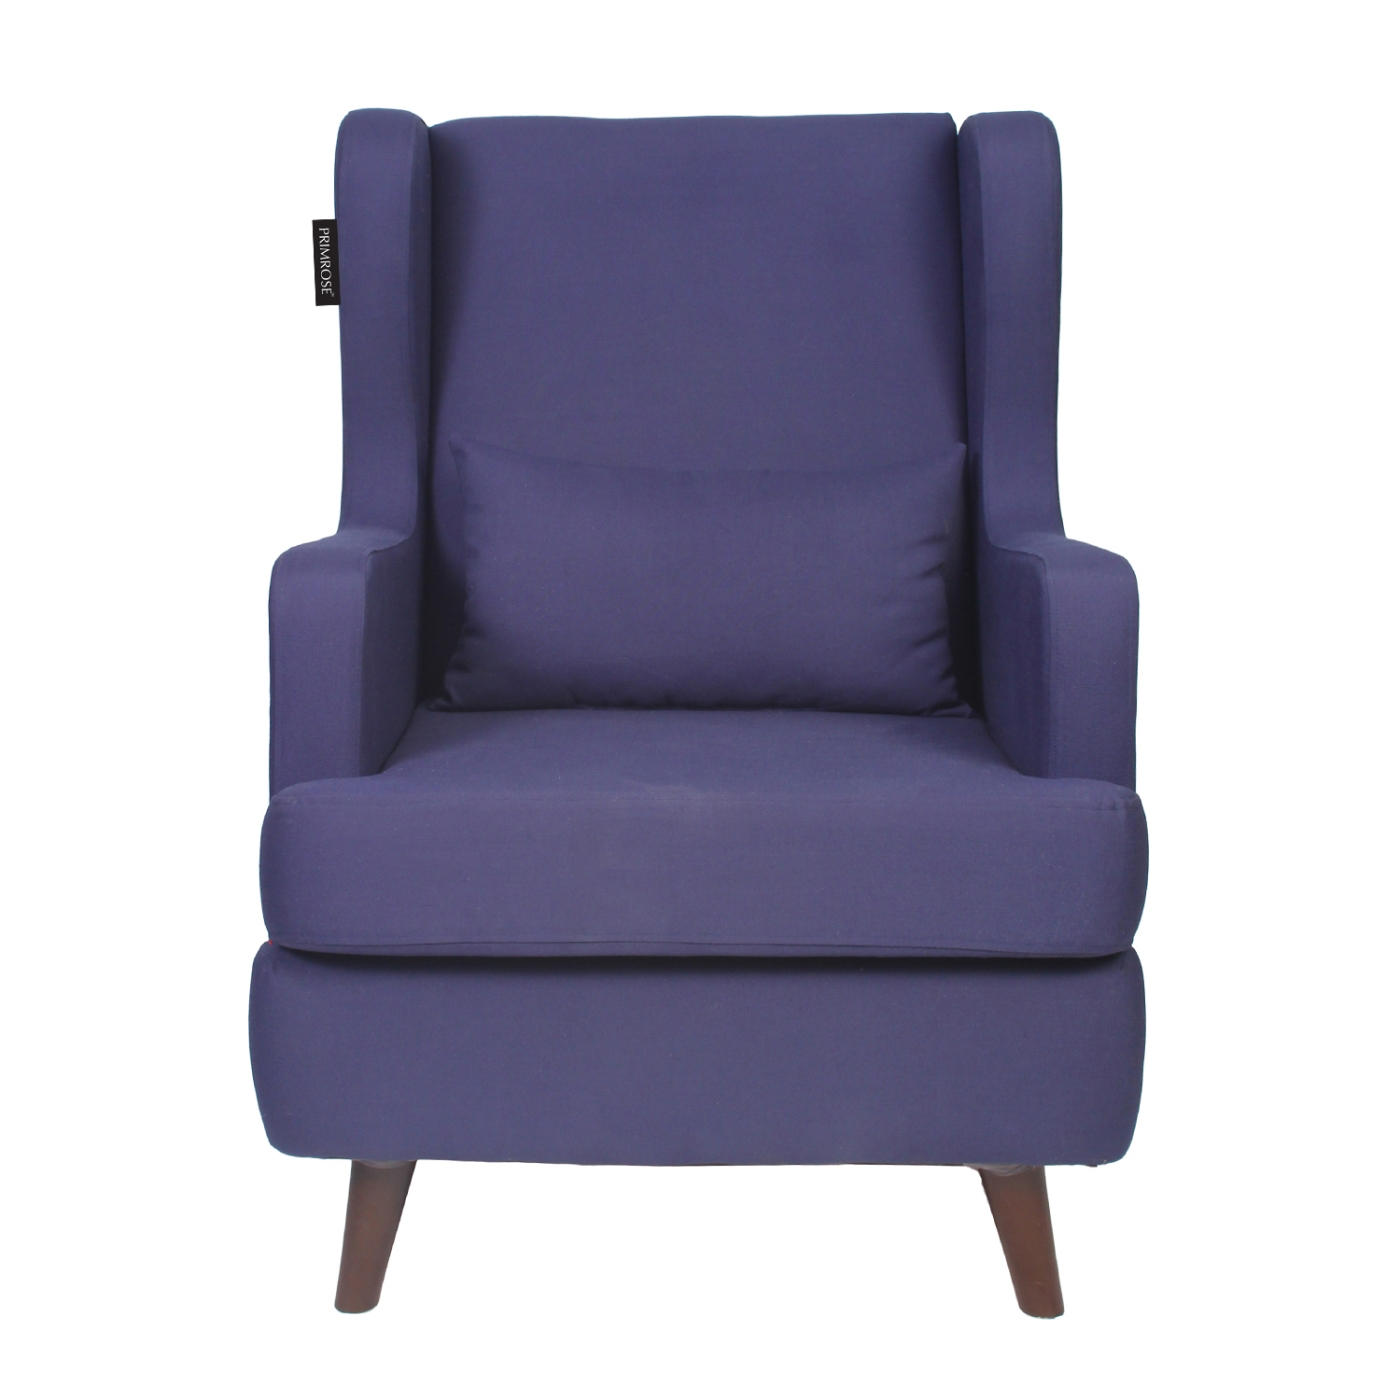 PRIMROSE Wing High Back Faux Fabric Chair - Navy Blue  